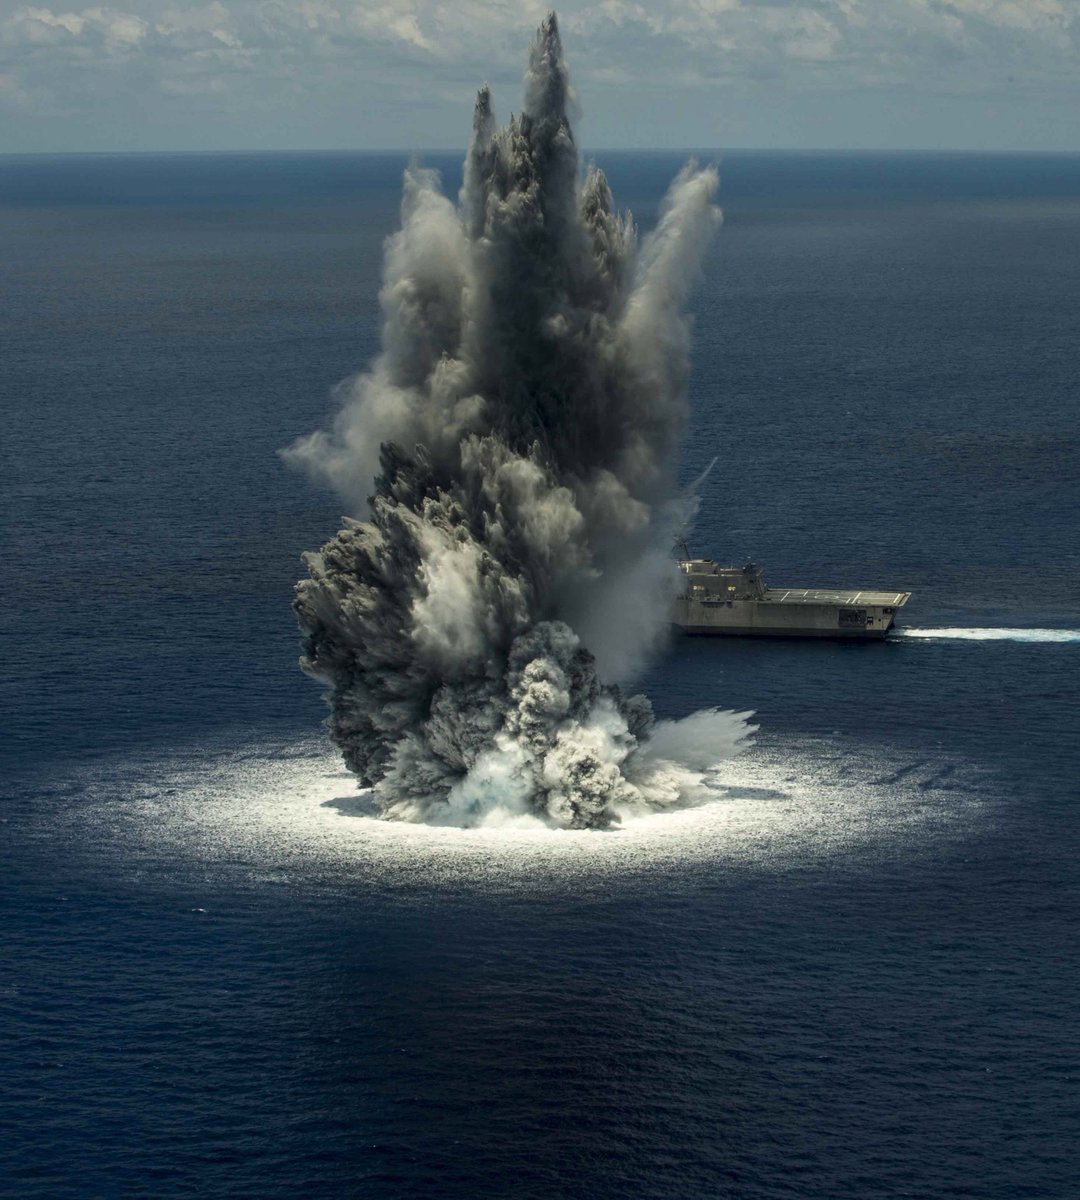 #USSJackson (#LCS6) successfully completed 1st of 3 scheduled full ship shock trials June 10 in the Atlantic Ocean.